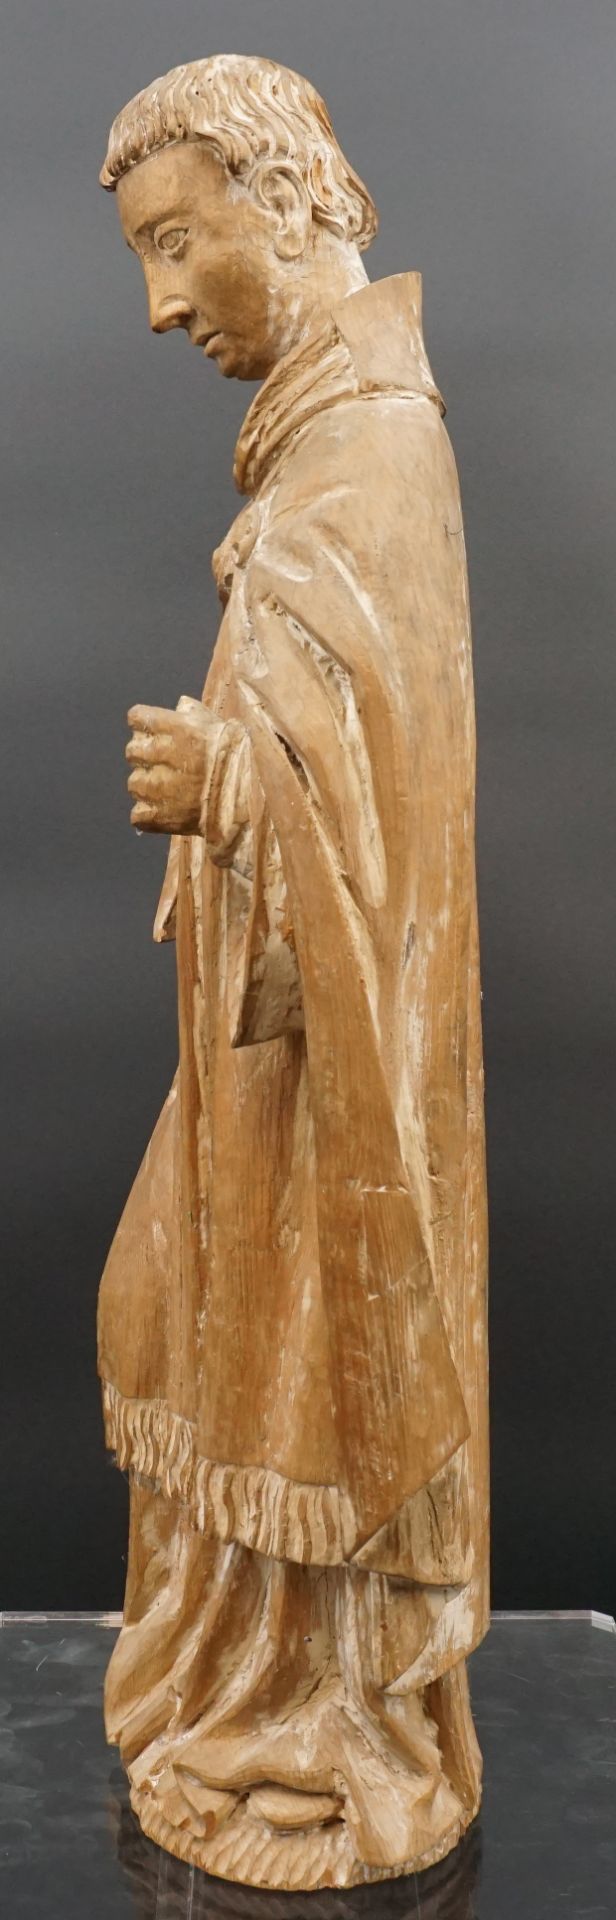 Wooden figure. St. Monk. 19th century. - Image 2 of 14